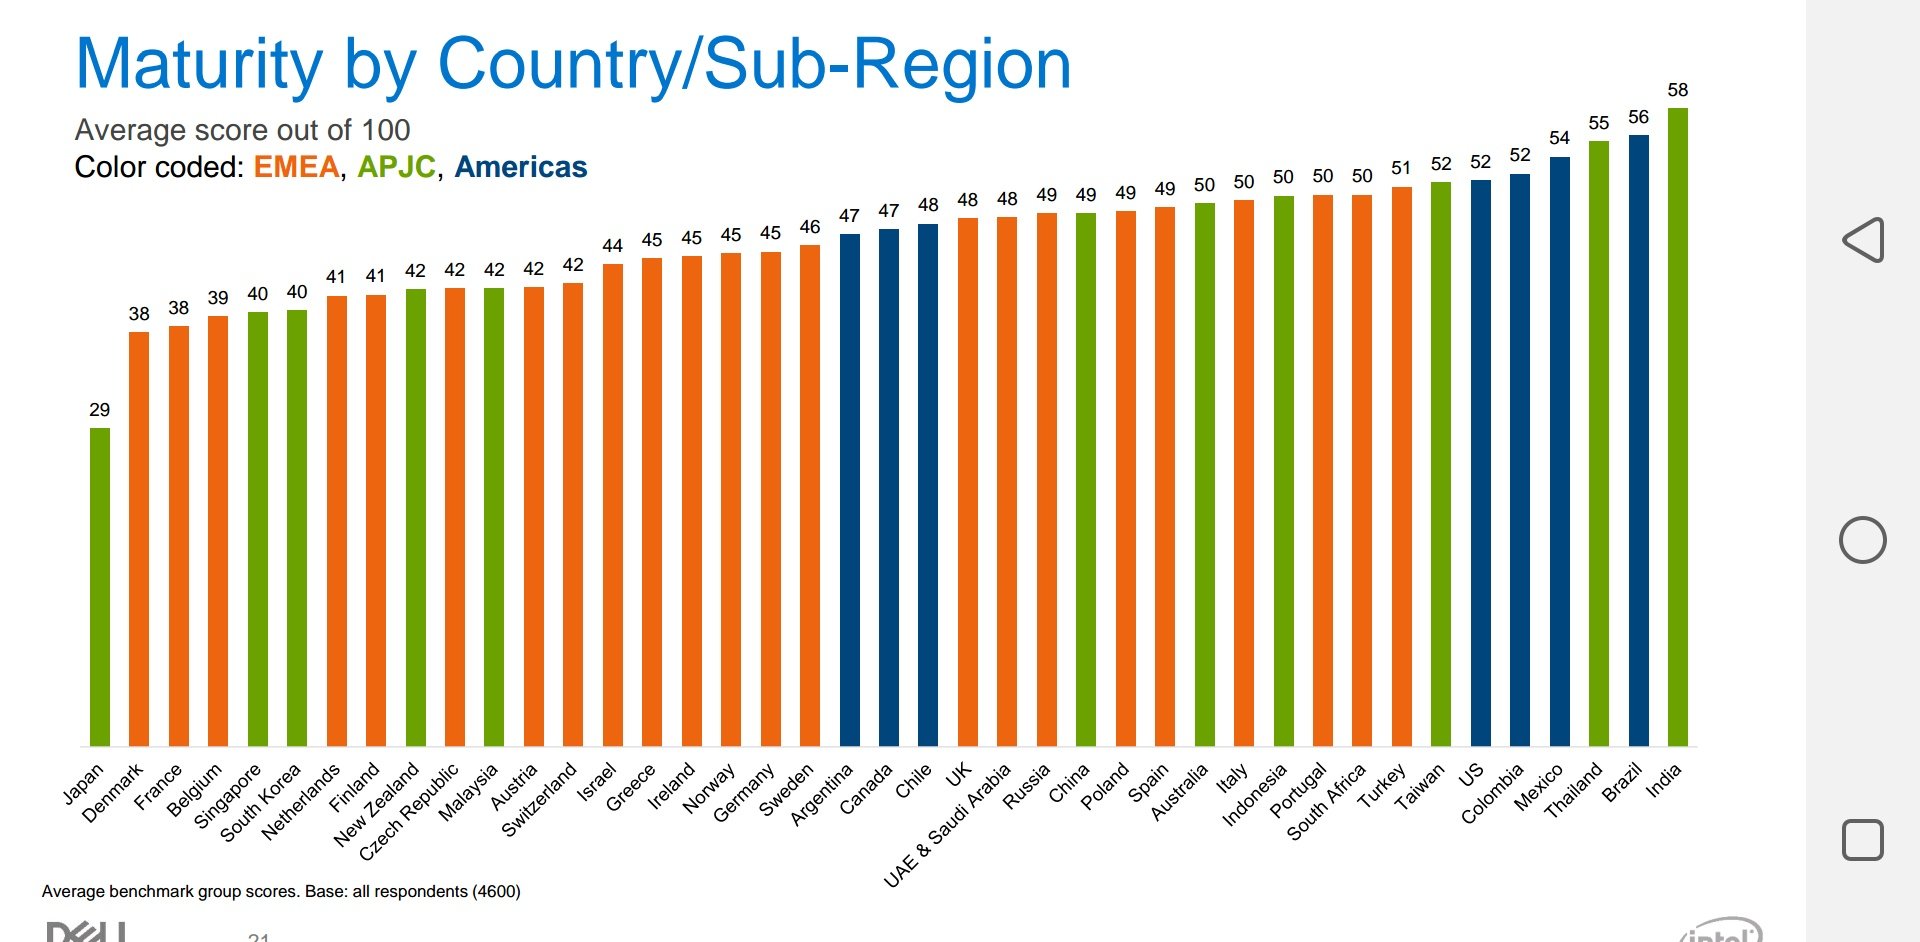 South Africa Ranked 9th More Digitally Mature Country in the World